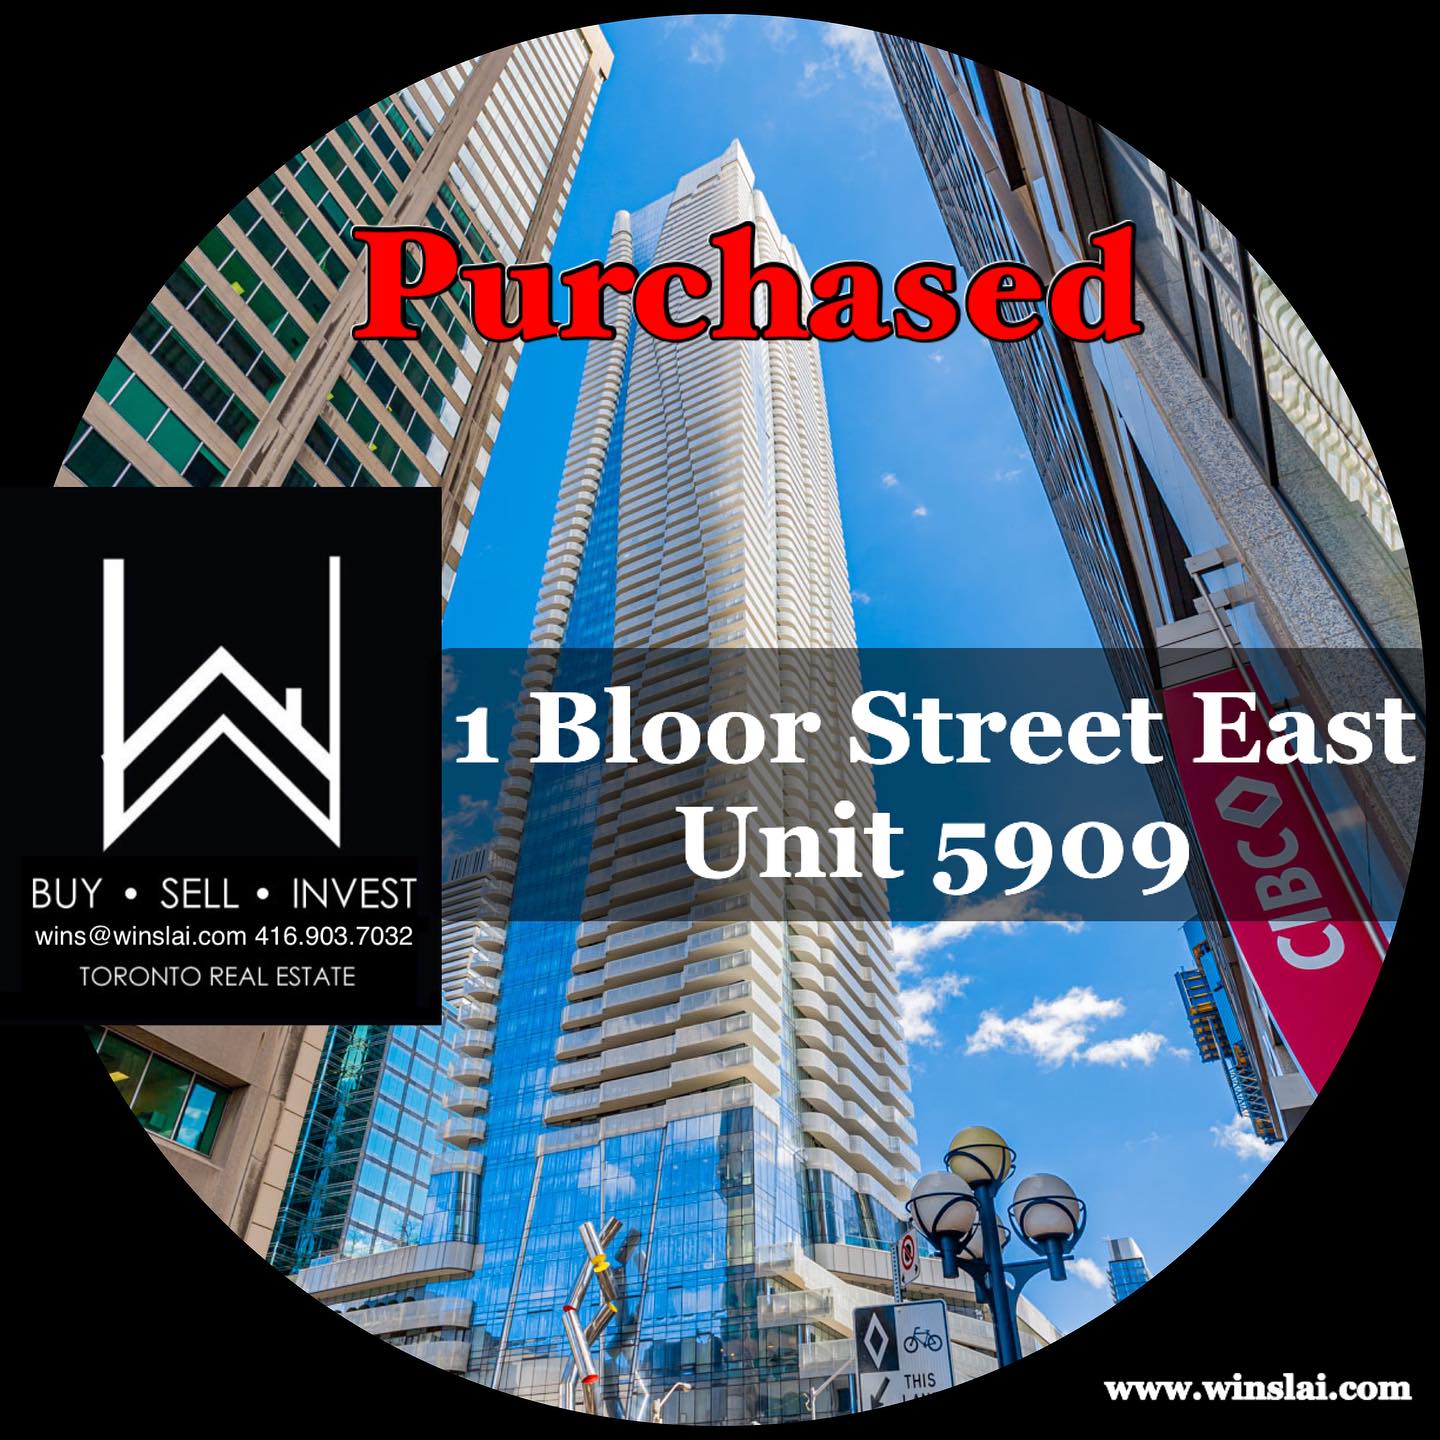 Purchased flyer for 1 Bloor St E condo to show October 2023 deep buyer's market.